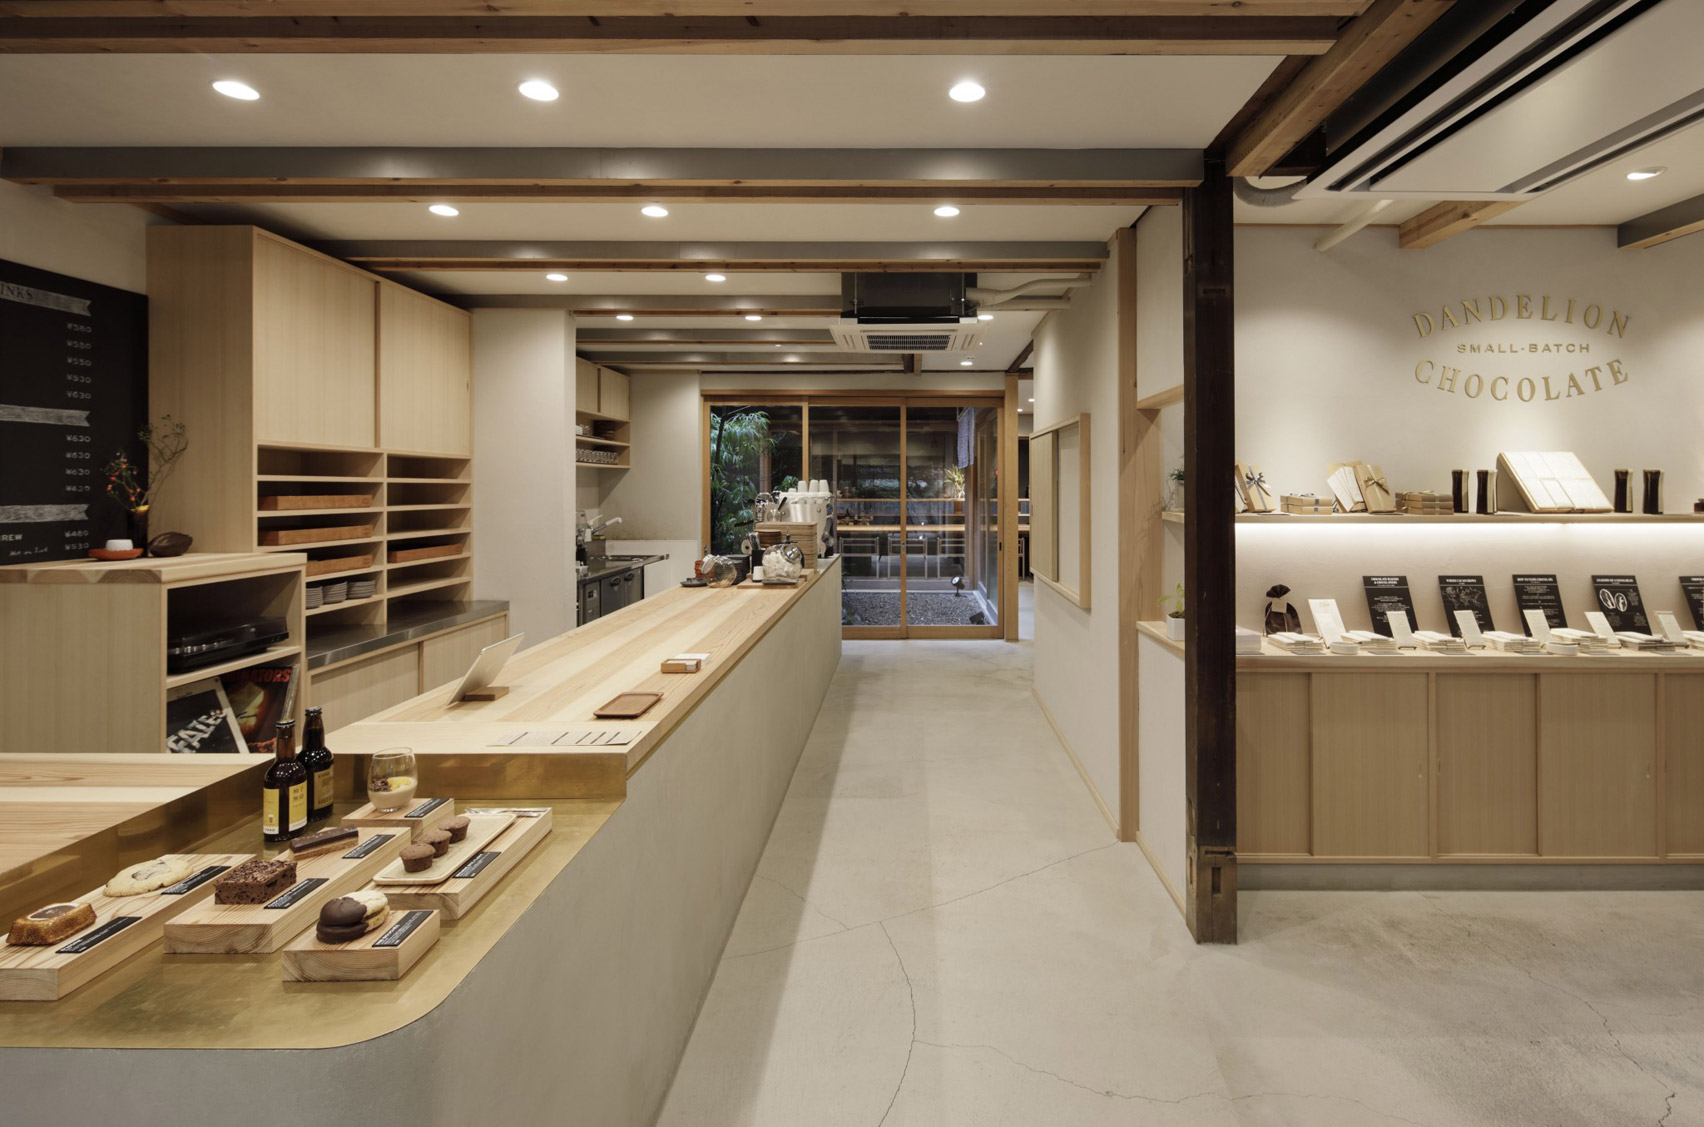 Cedar and cacao infuse the interiors of Kyoto’s Dandelion Chocolate cafe